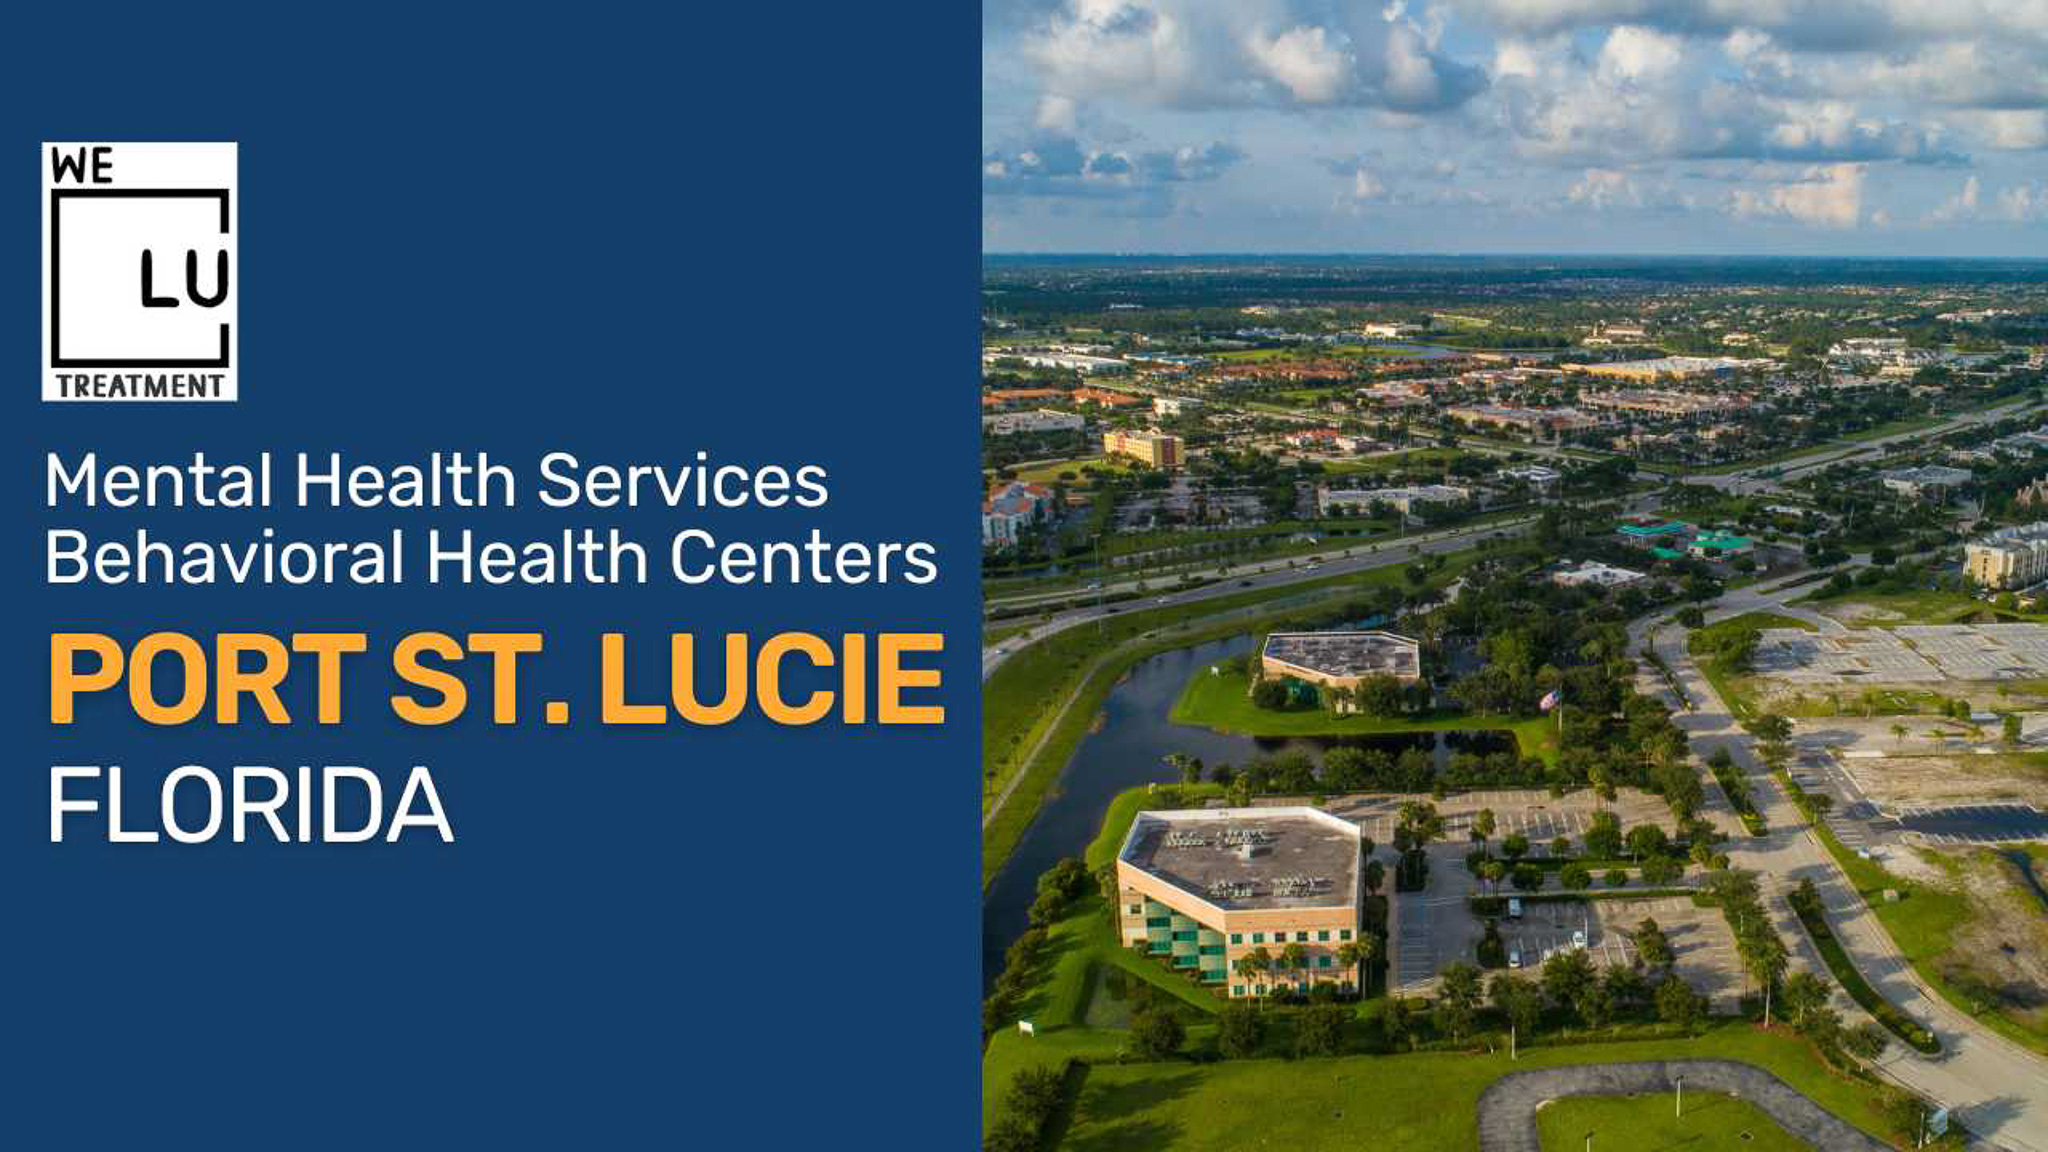 Port St. Lucie FL (MH) We Level Up treatment center for drug and alcohol rehab detox and mental health services - Image 1